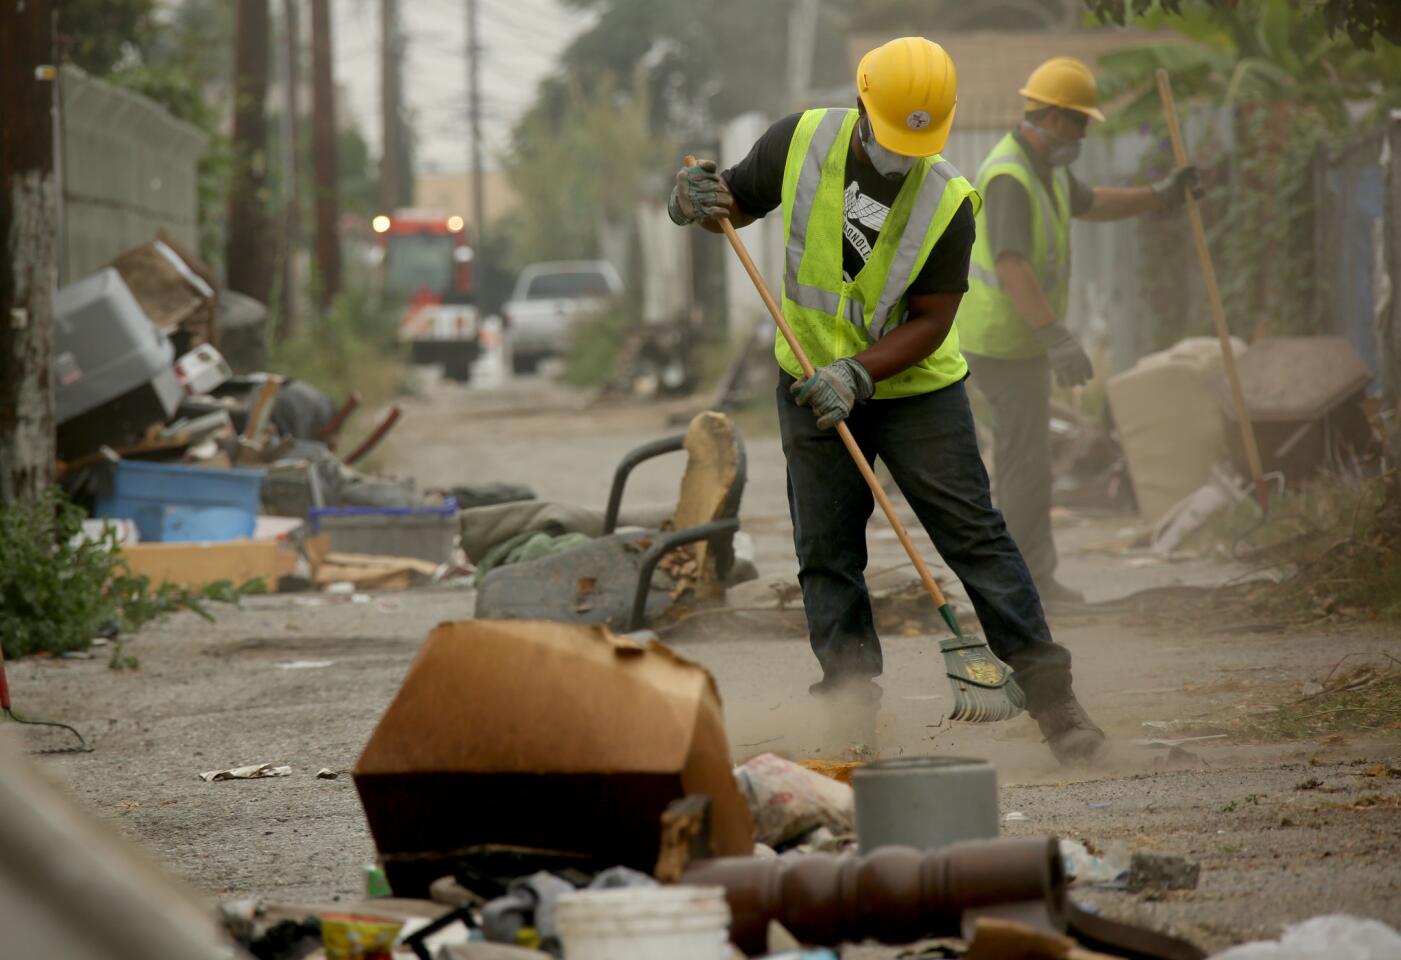 Cleaning up the streets of L.A.